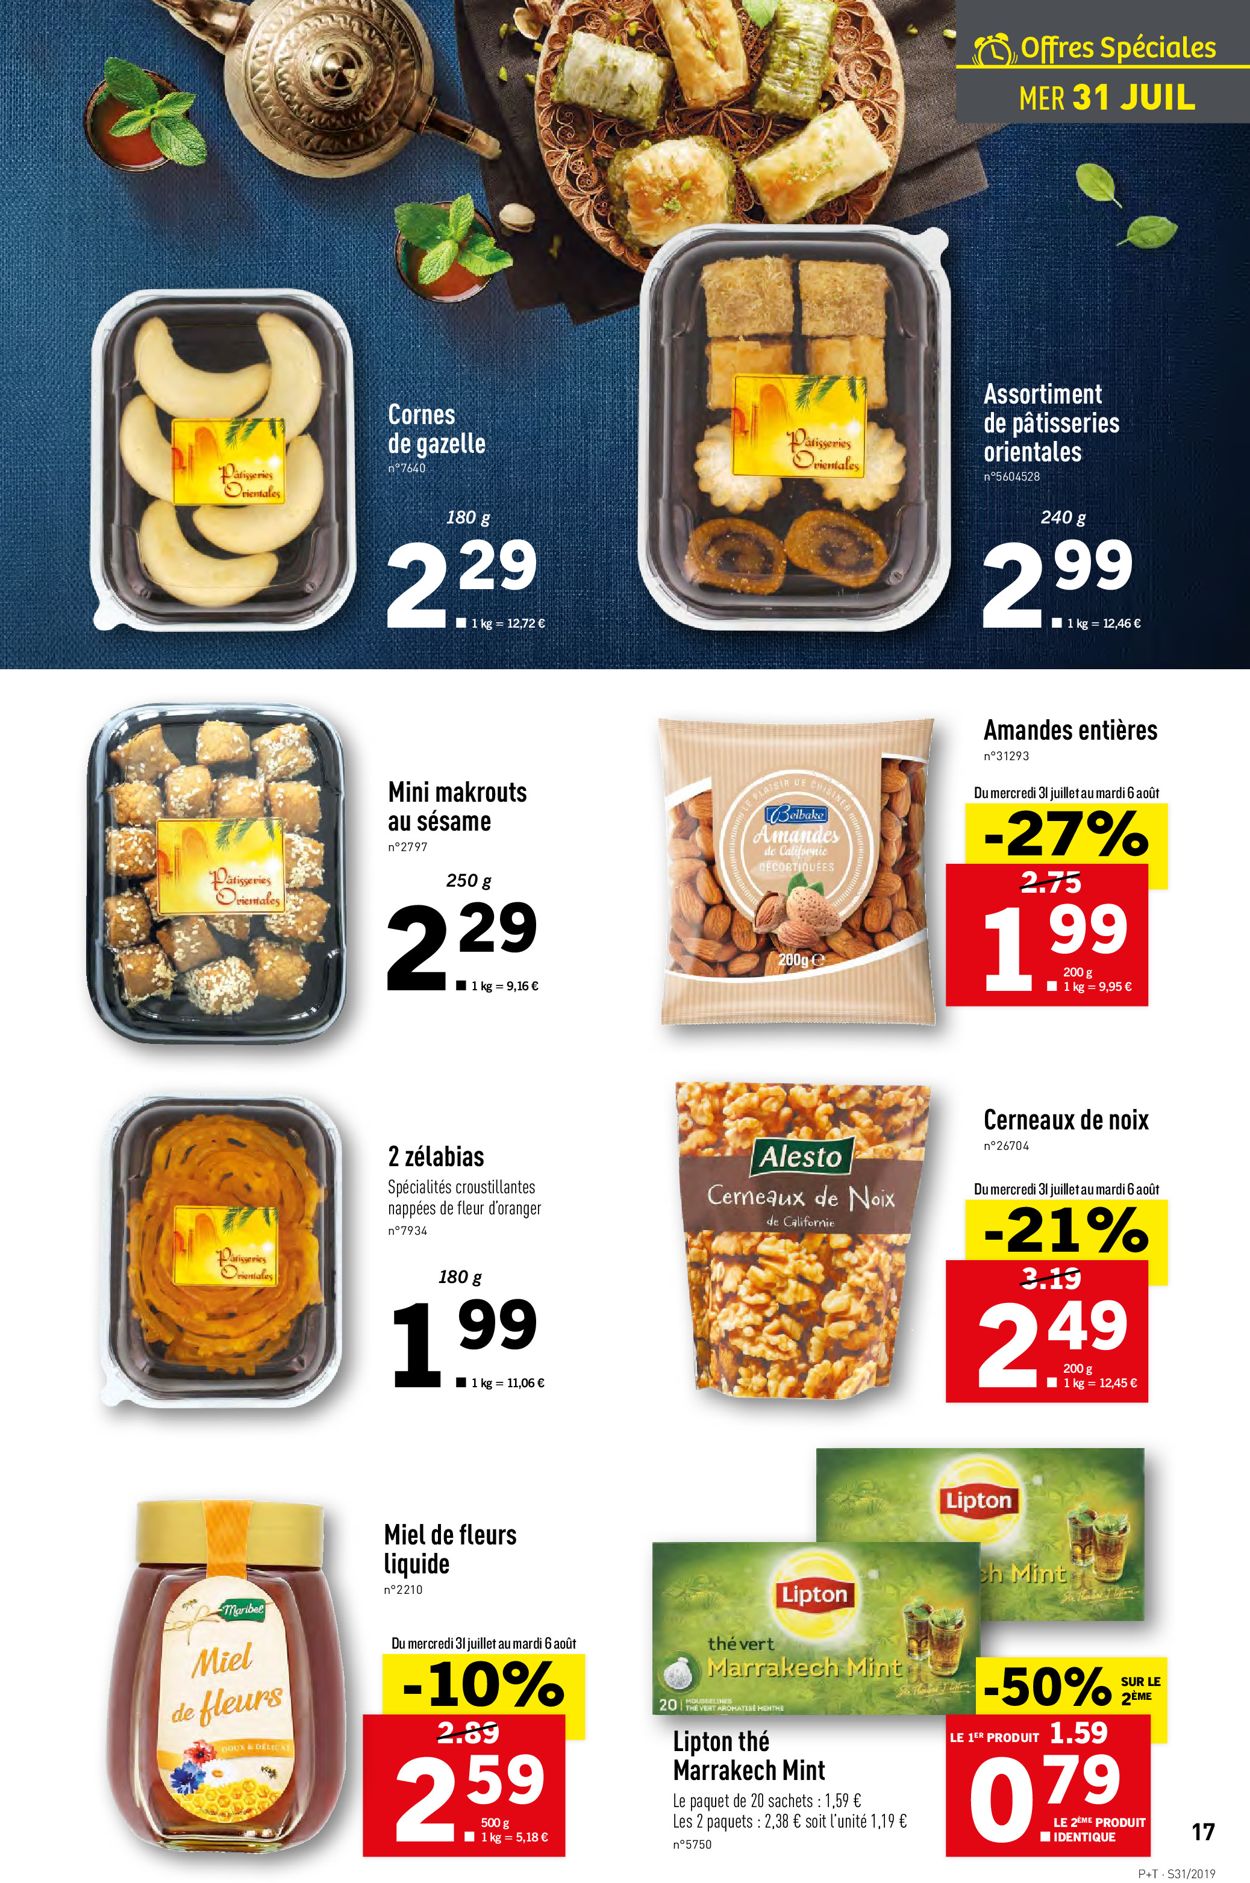 Lidl Catalogue - 31.07-06.08.2019 (Page 17)